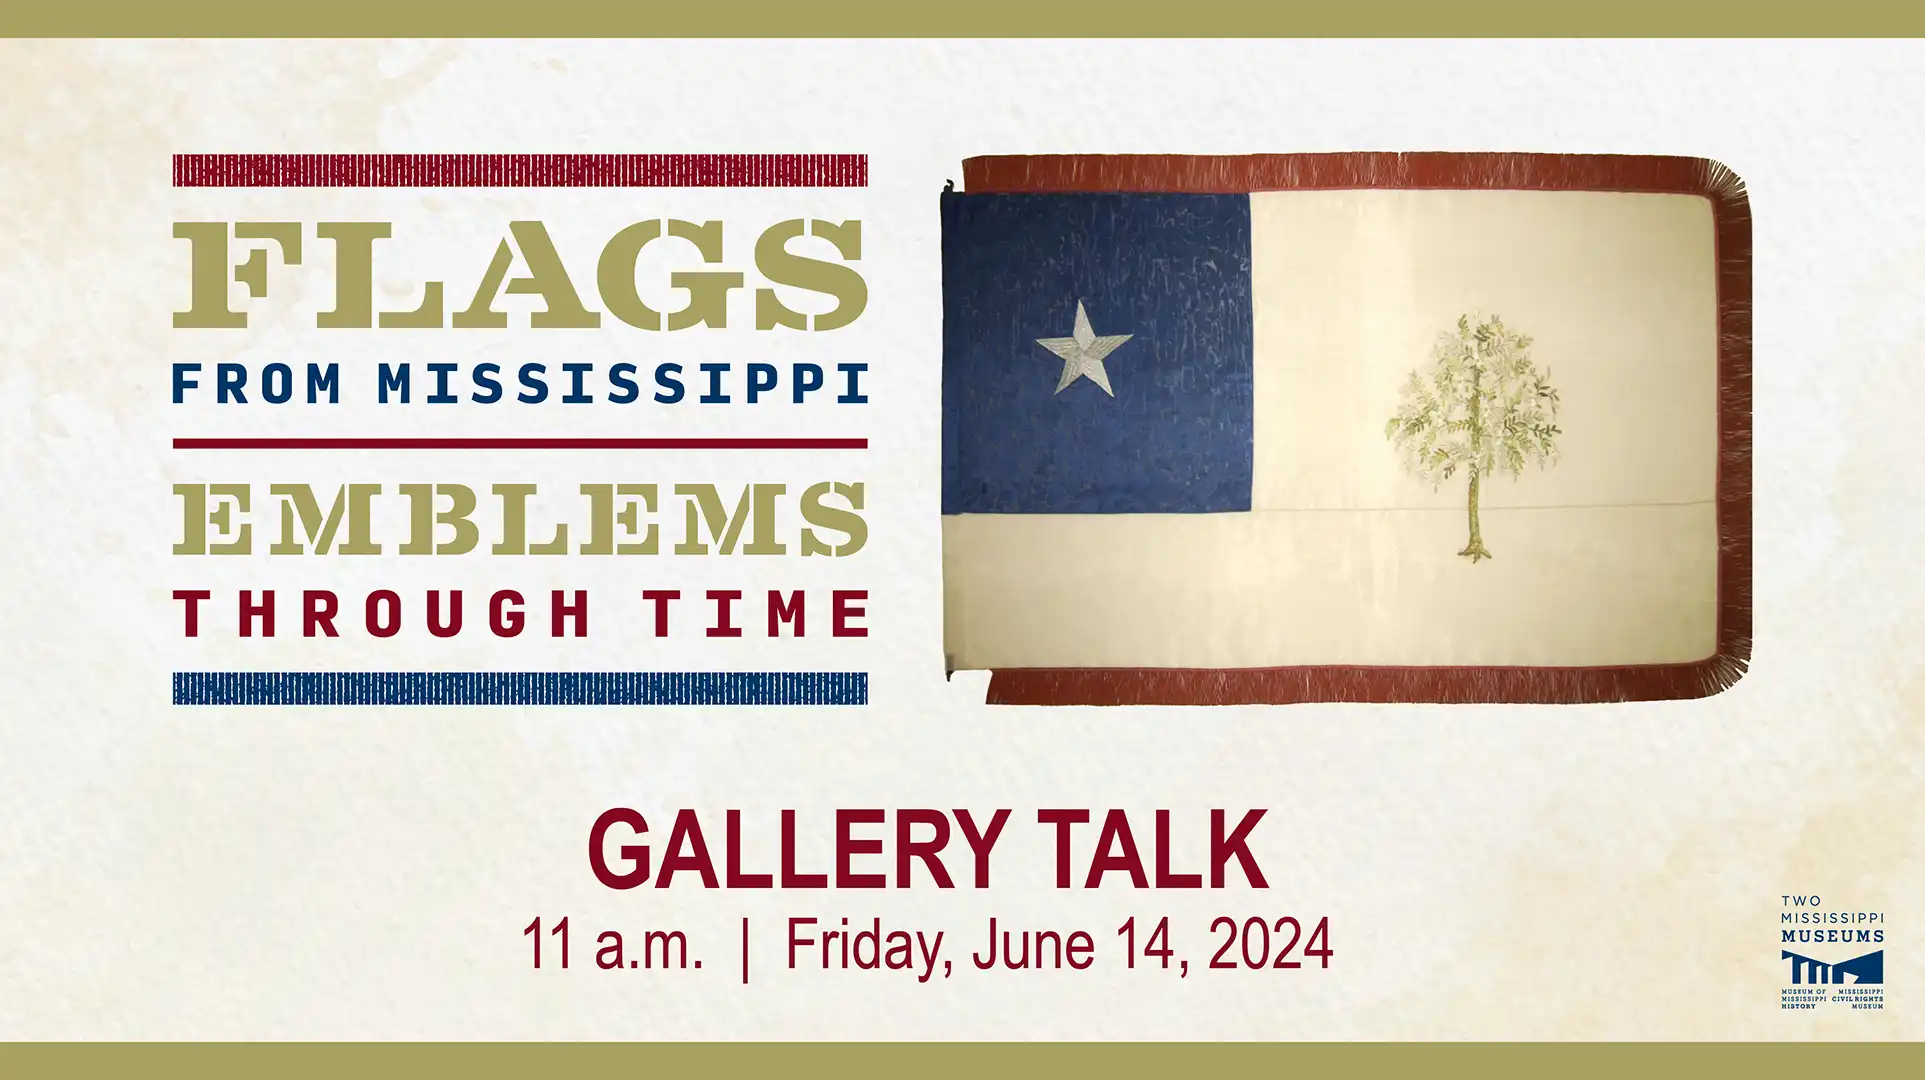 Flags from Mississippi - Emblems Through Time Gallery Talk, June 14, 2024